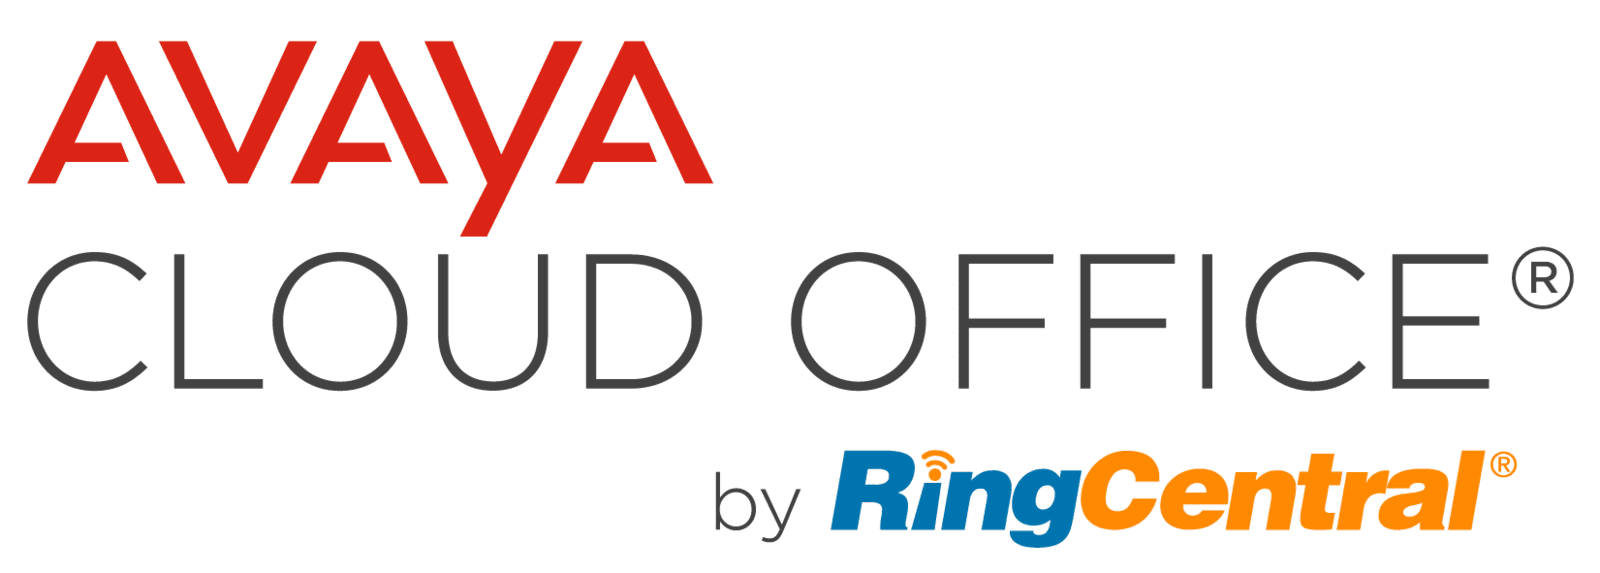 Avaya Cloud Office by RIngCentral